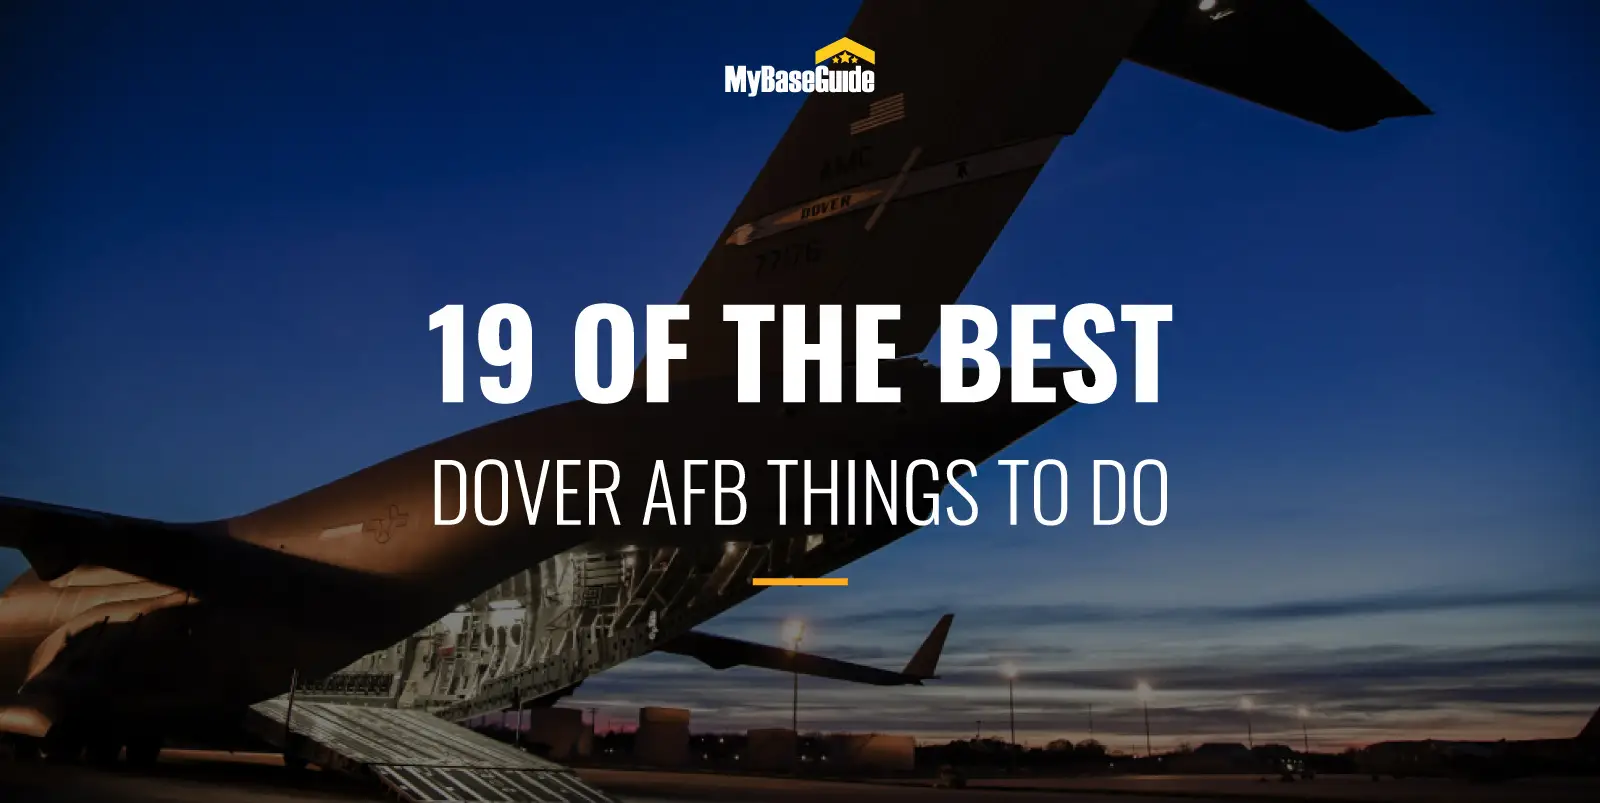 Dover AFB Sports and Fitness Center - Here's examples of what is